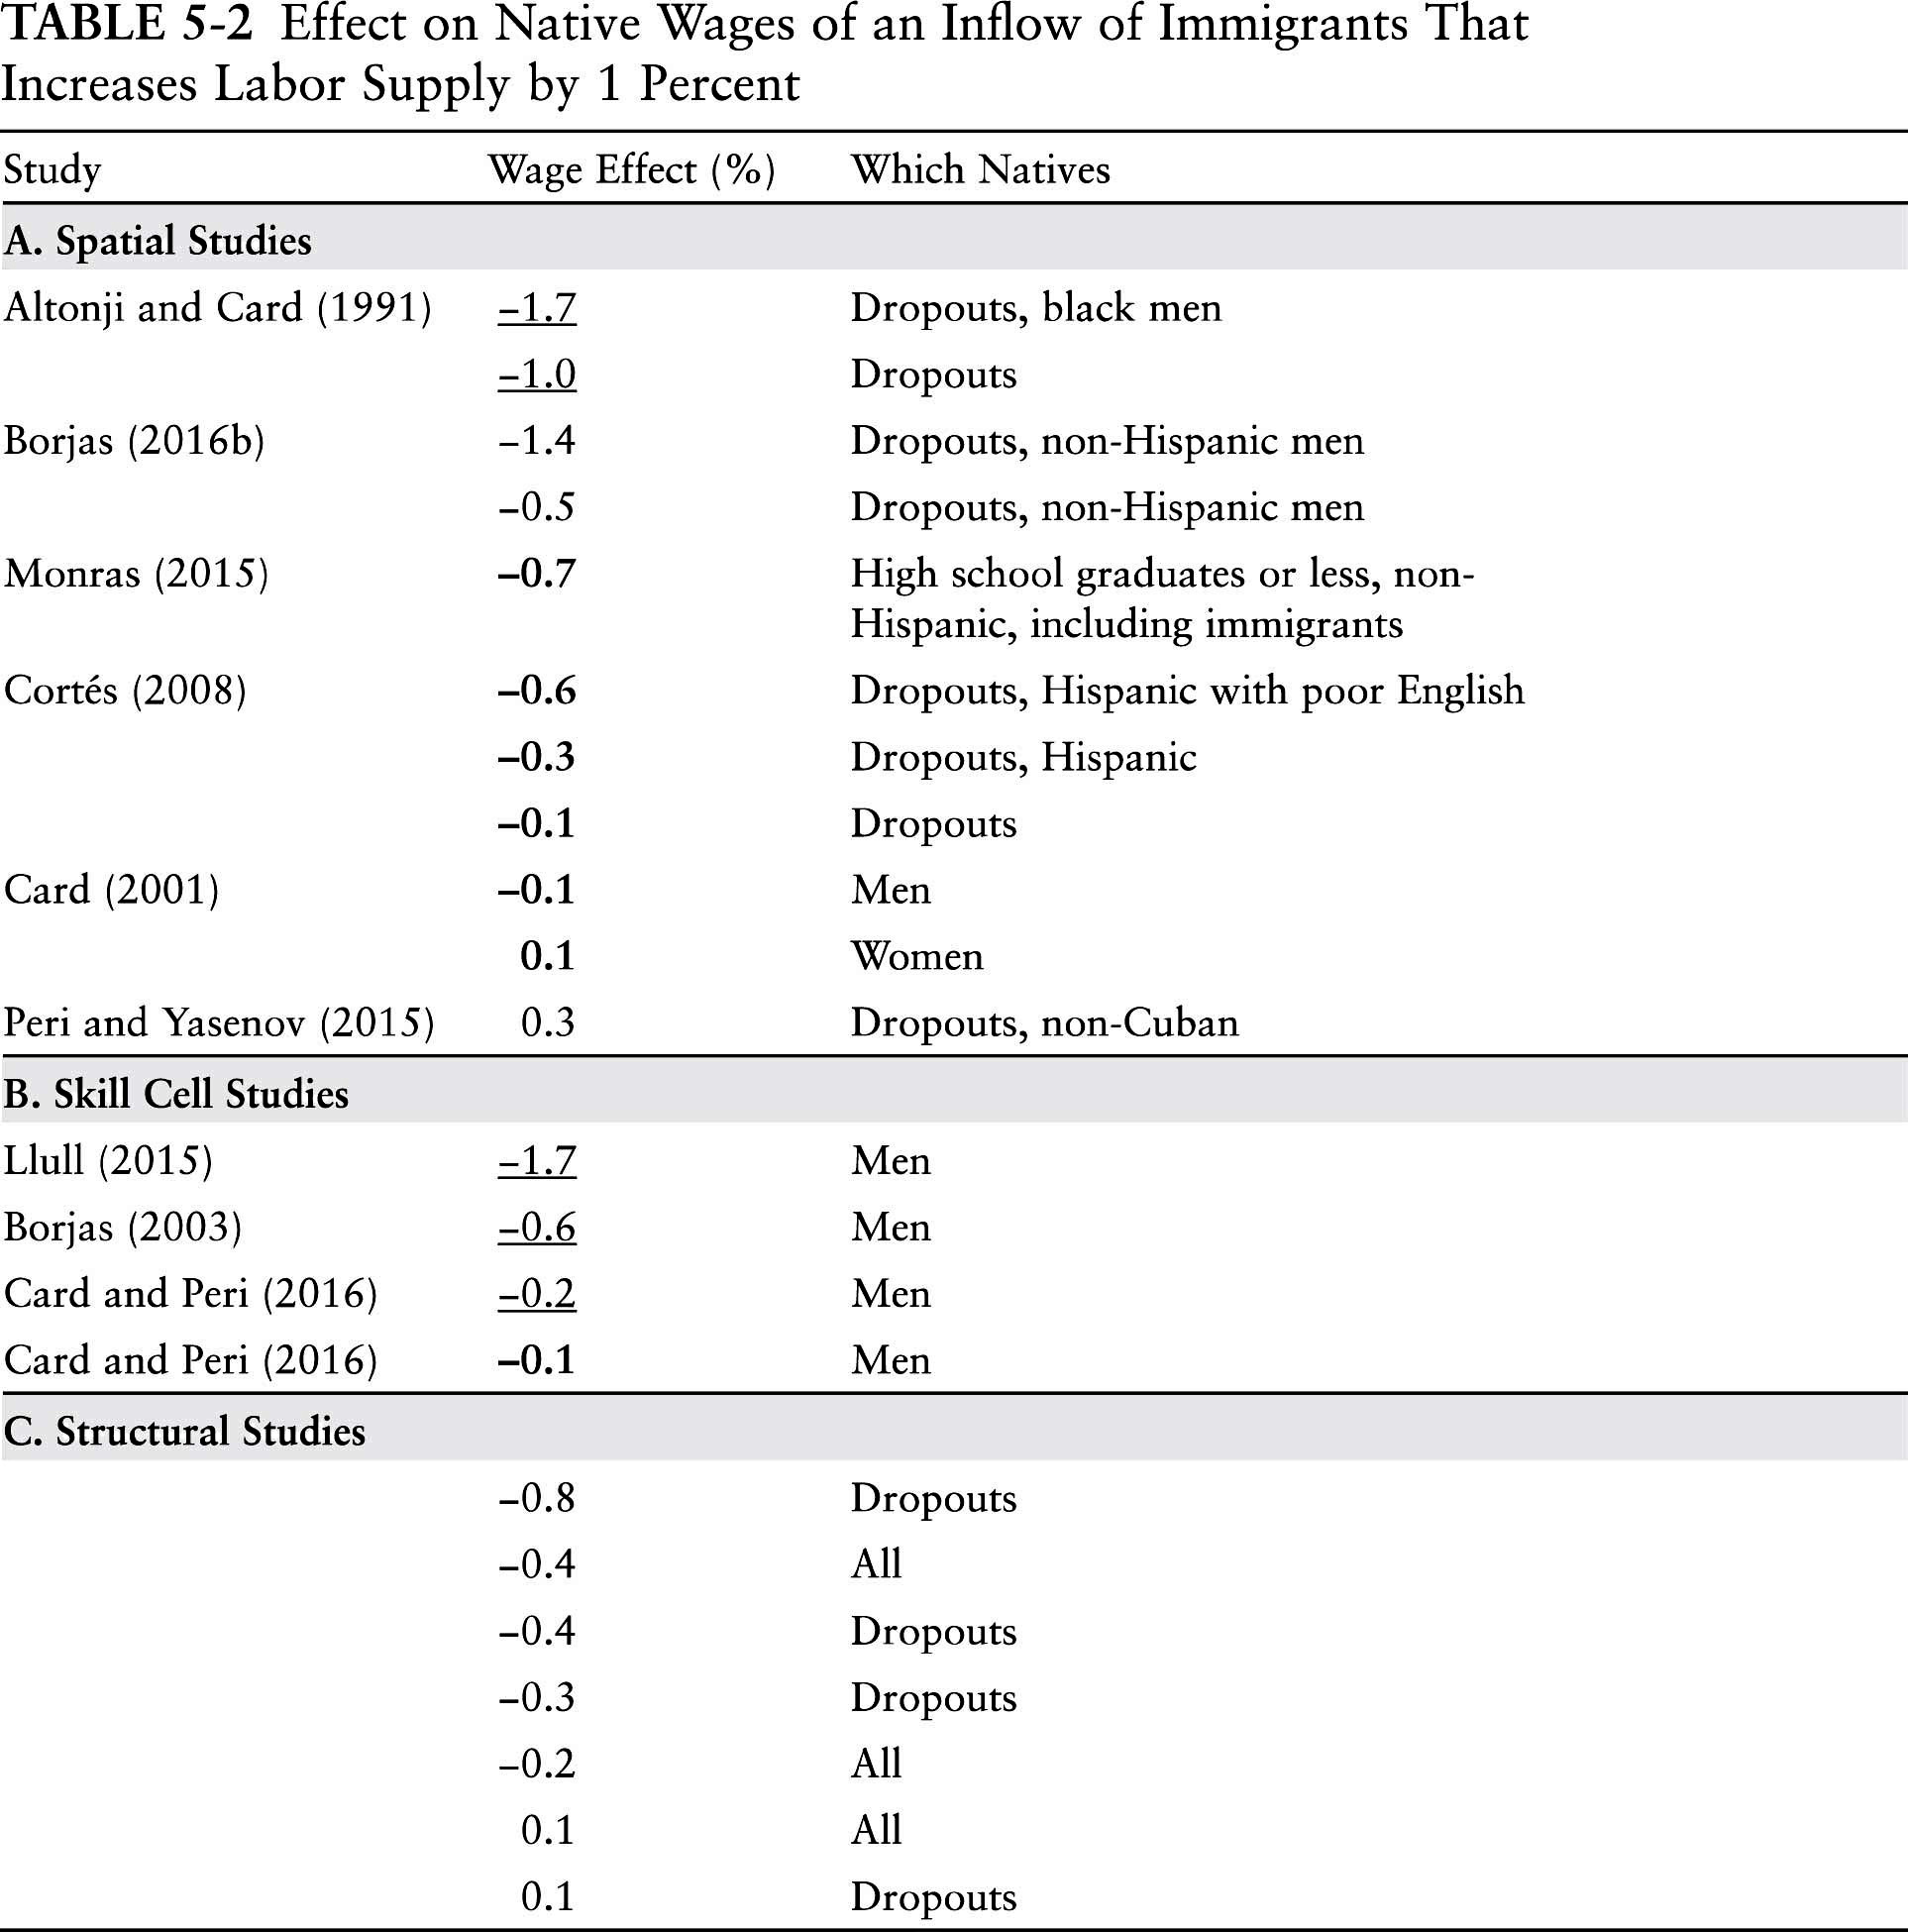 Table: Effect of Native Wages of an Inflow of Immigrants That Increases Labor Supply by 1%